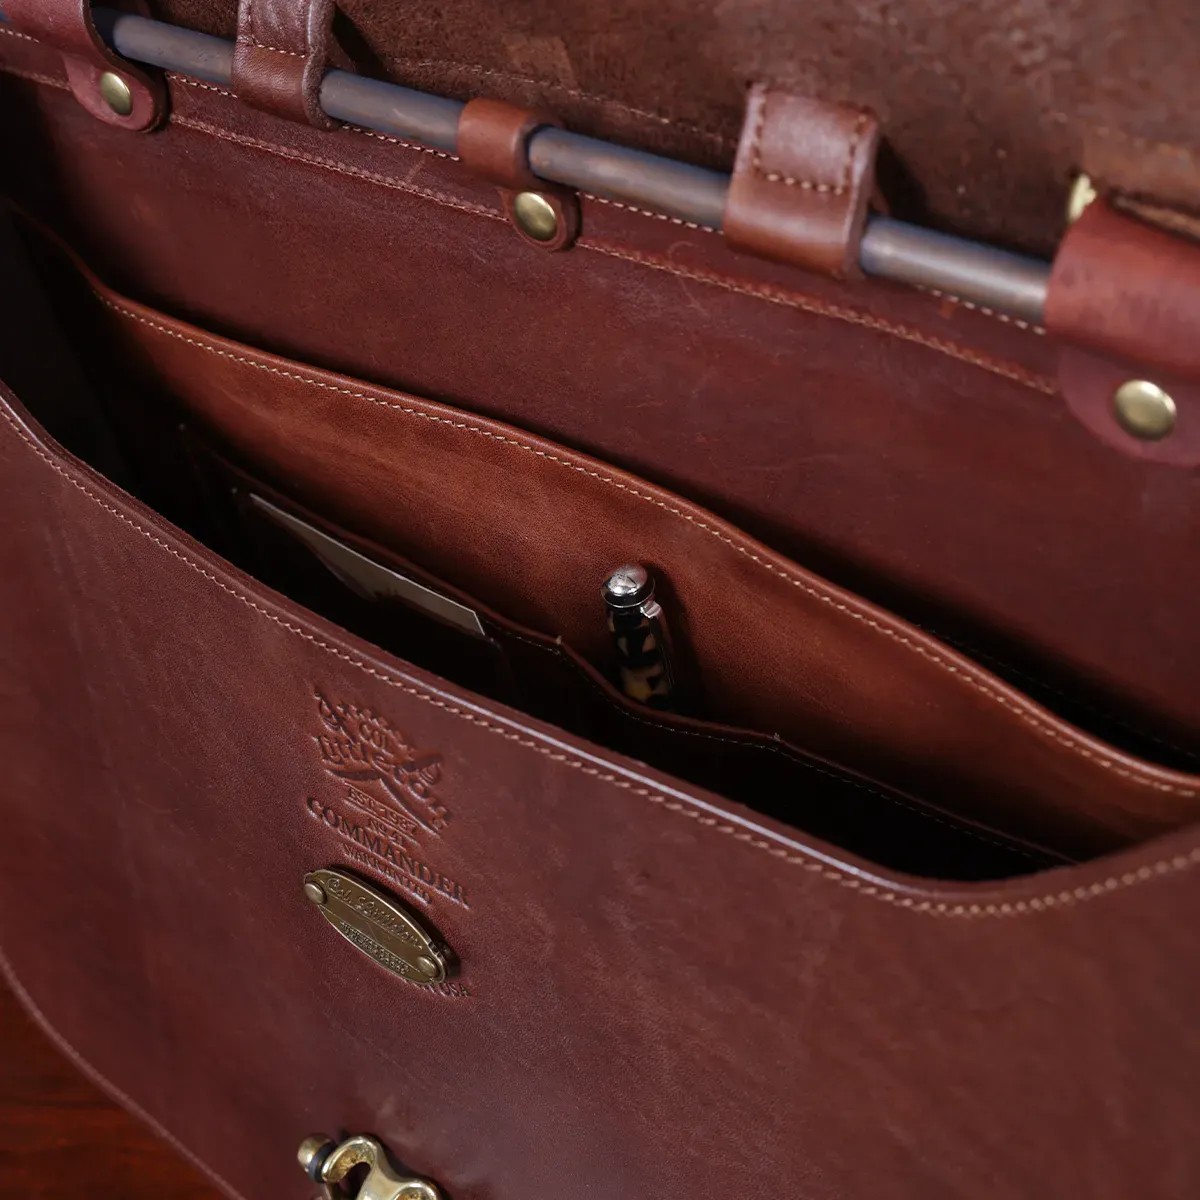 commander leather laptop briefcase on a wooden table with a dark background - inside view of pockets with pen and business card